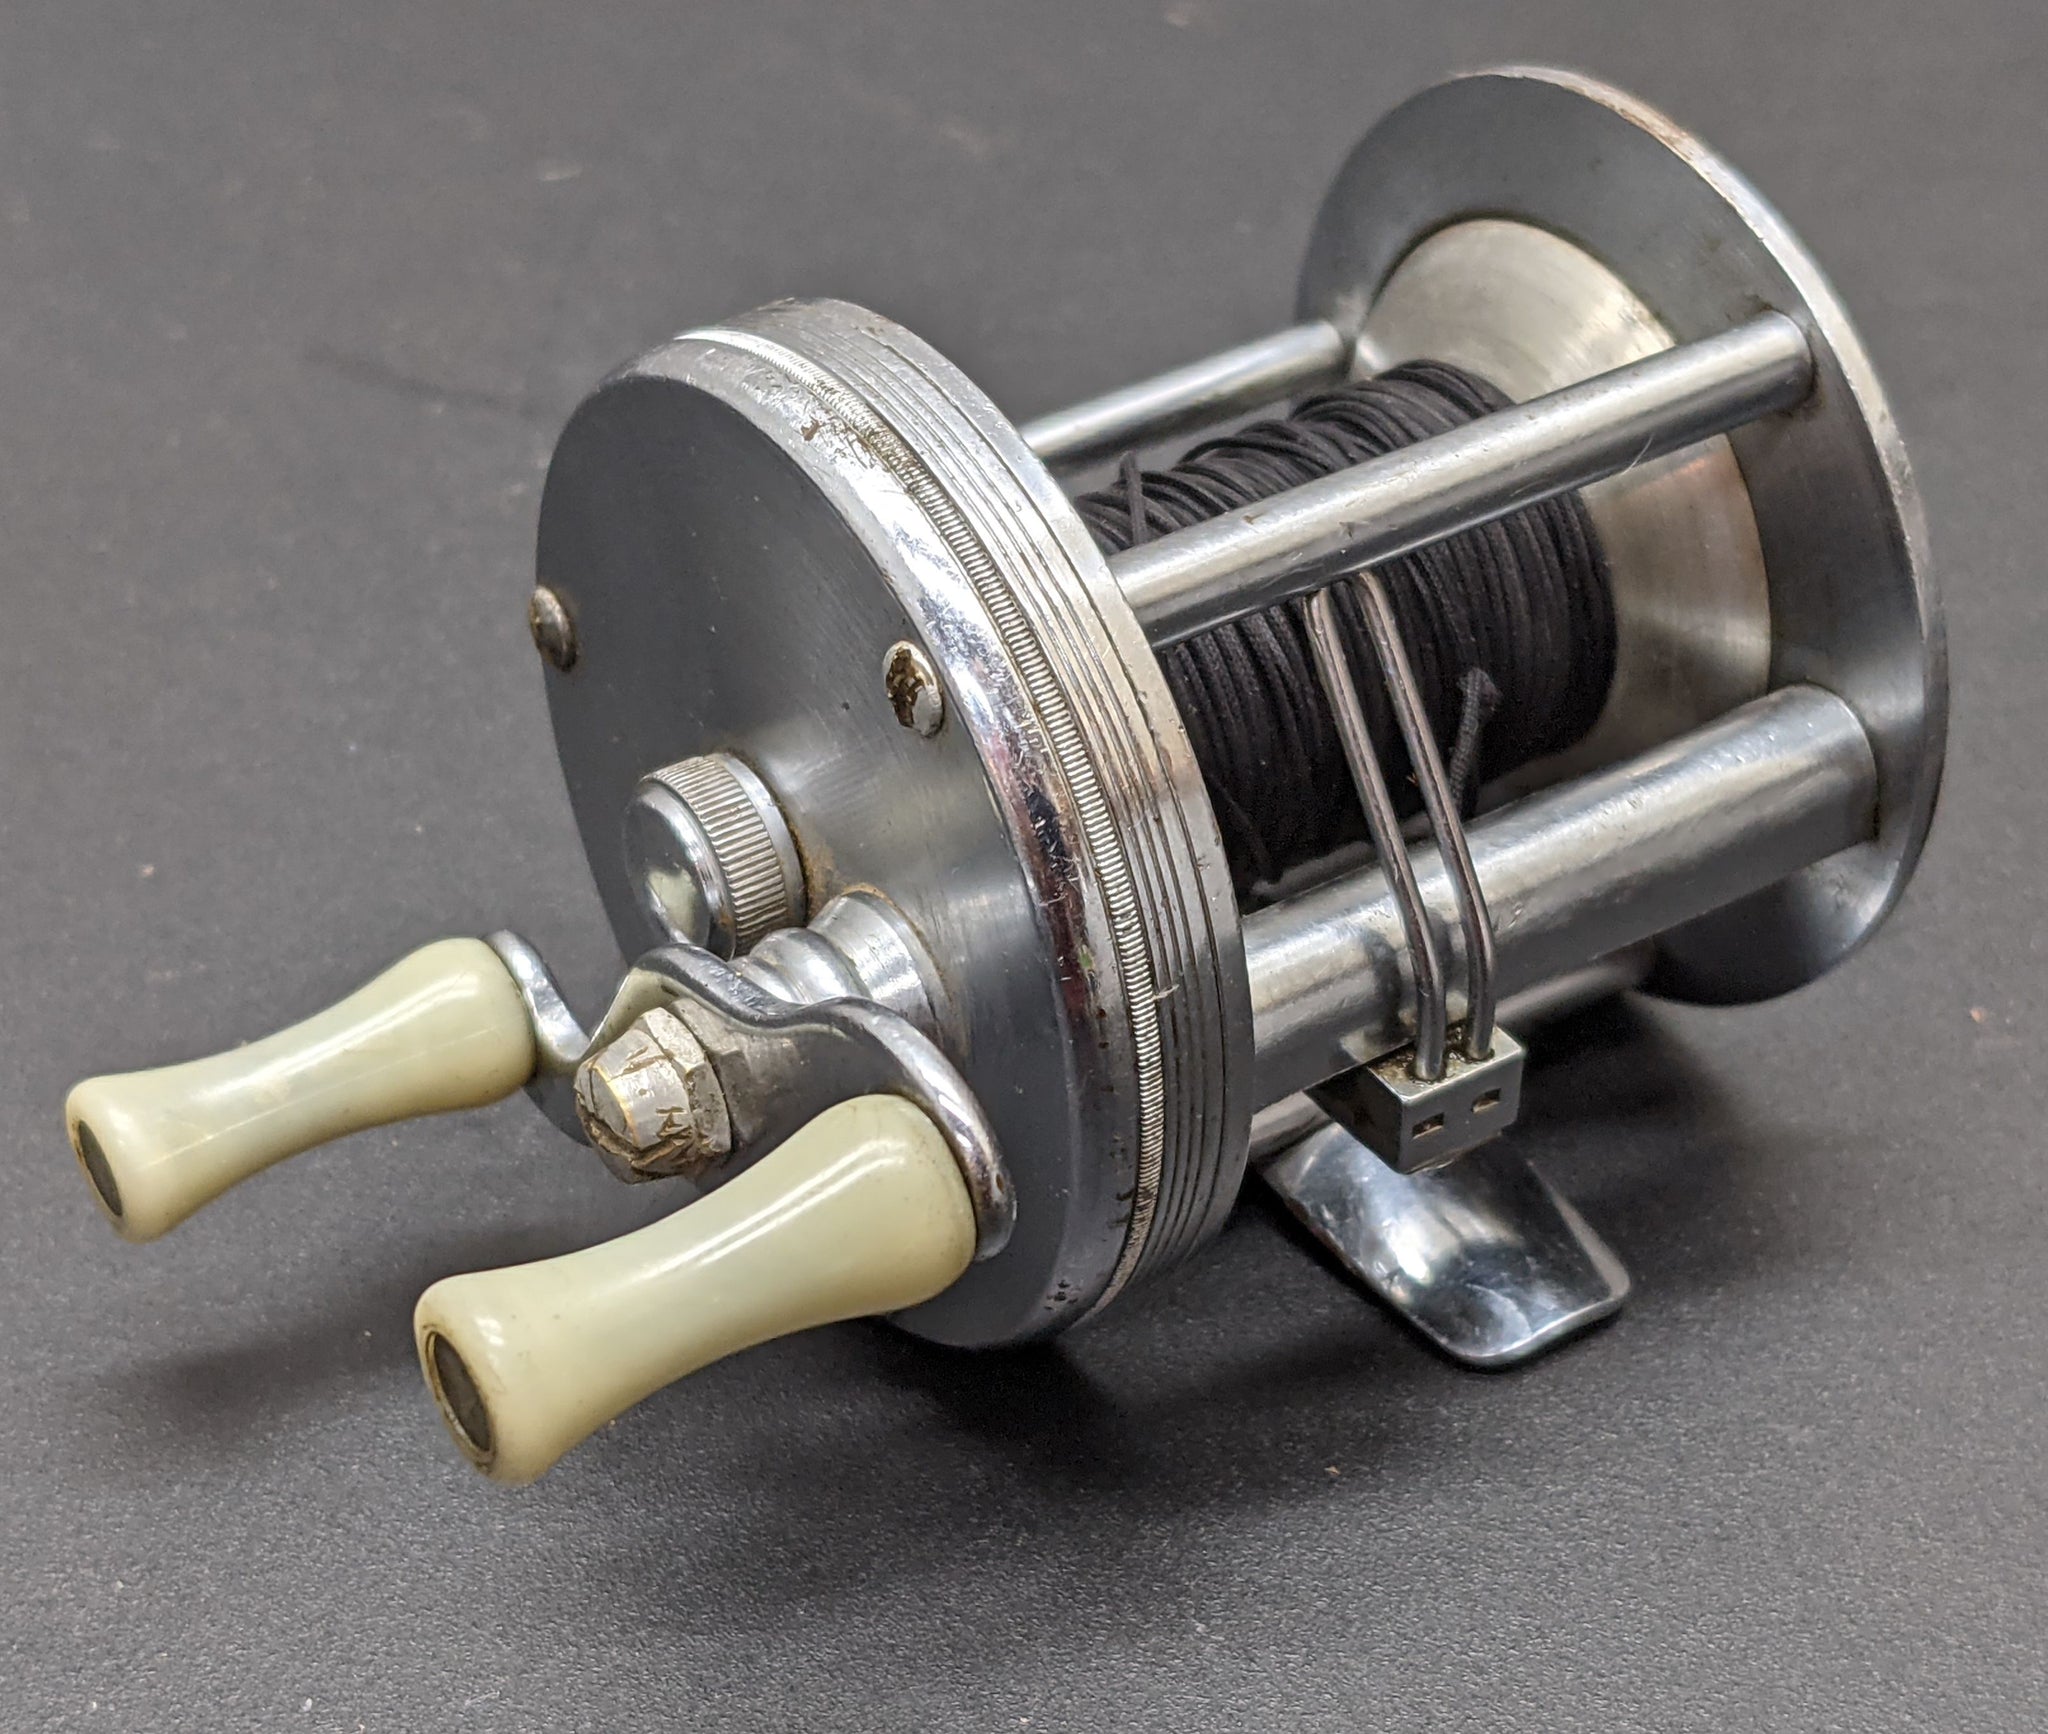 Bronson Lashless* Model No 1700-A Fishing Reel - Made in the USA F